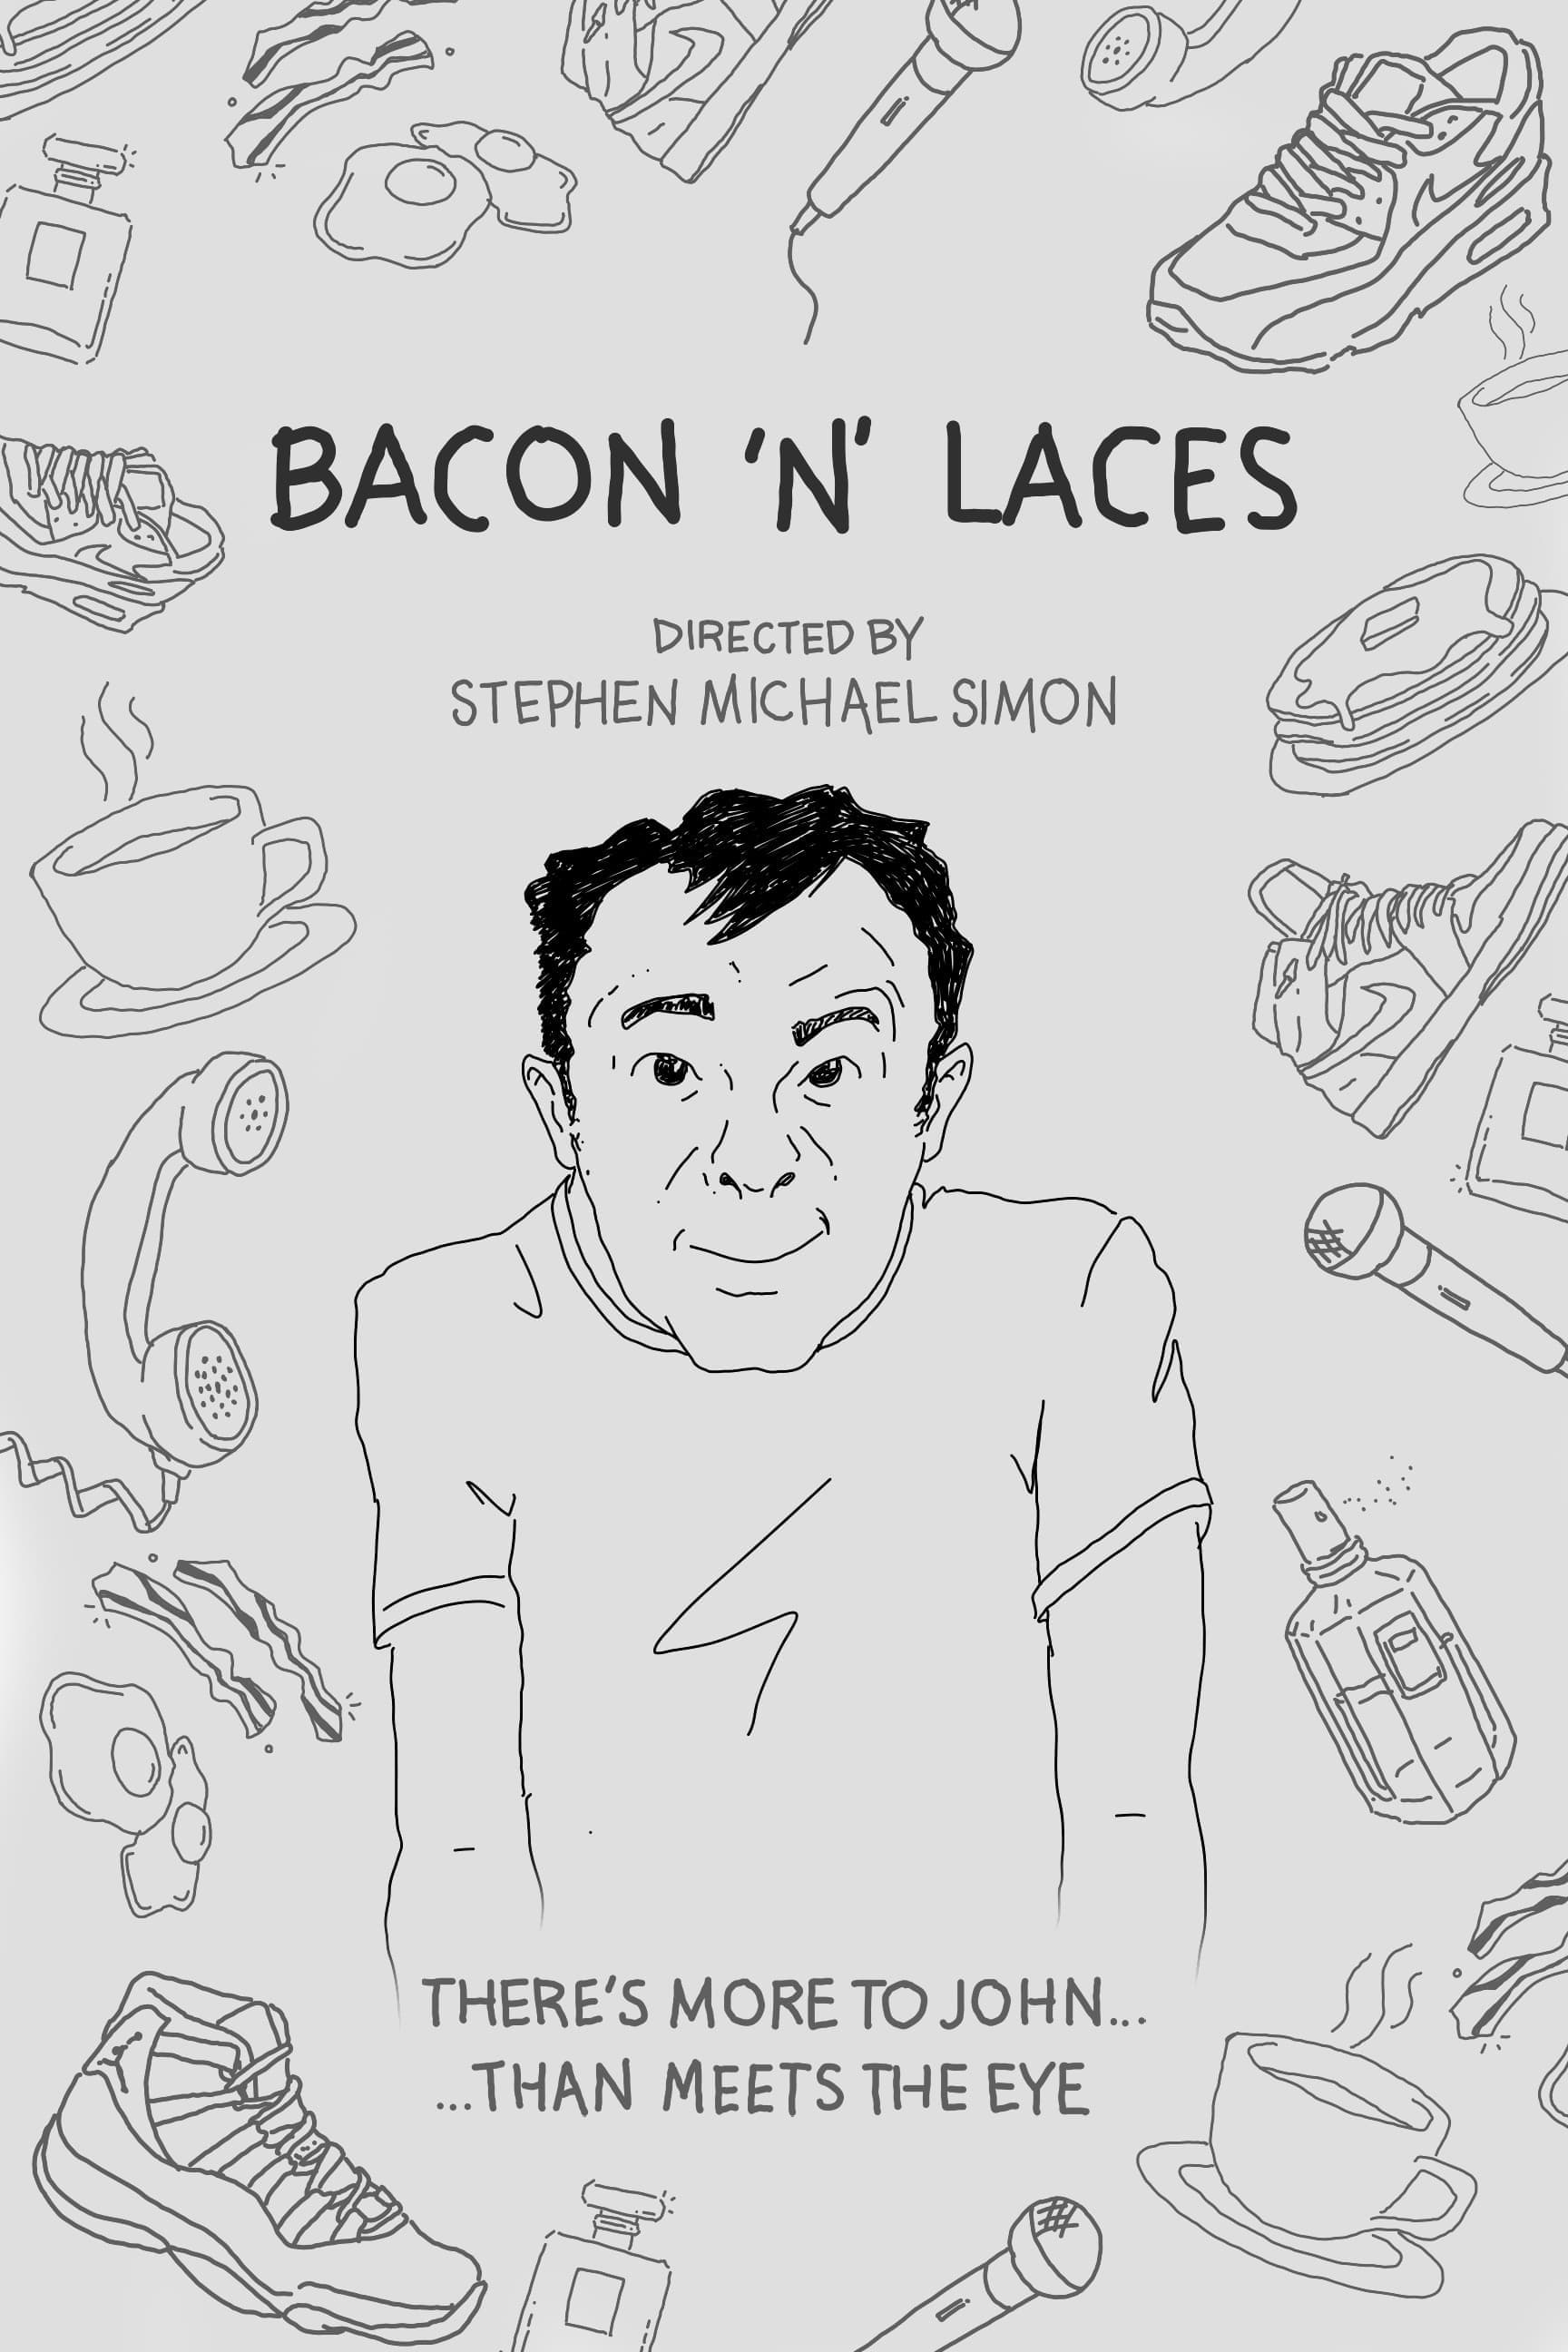 Bacon 'N' Laces